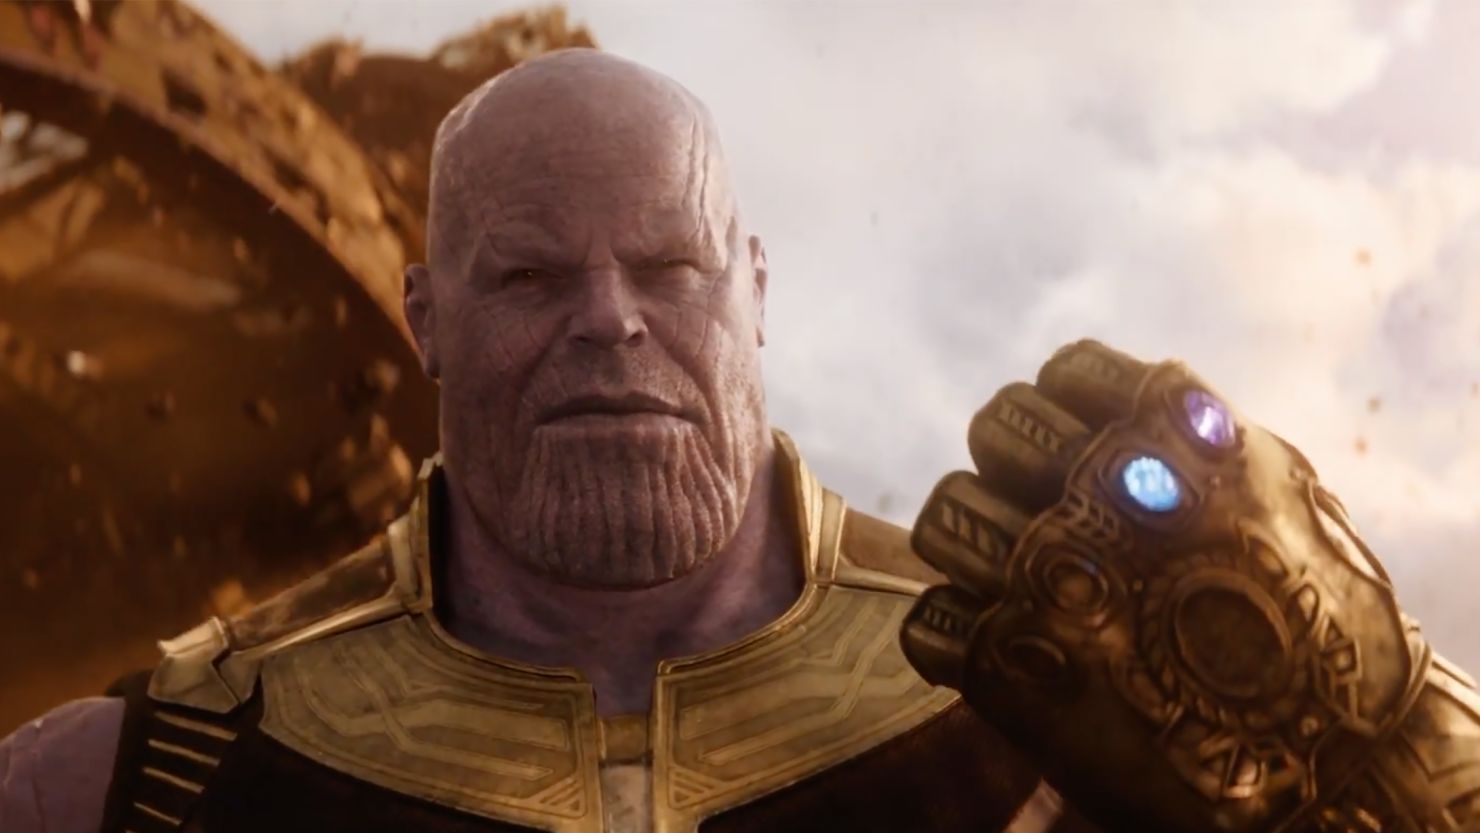 Avengers: Infinity War,” Reviewed: The Latest Marvel Movie Is a  Two-and-a-Half-Hour Ad for All the Previous Marvel Movies